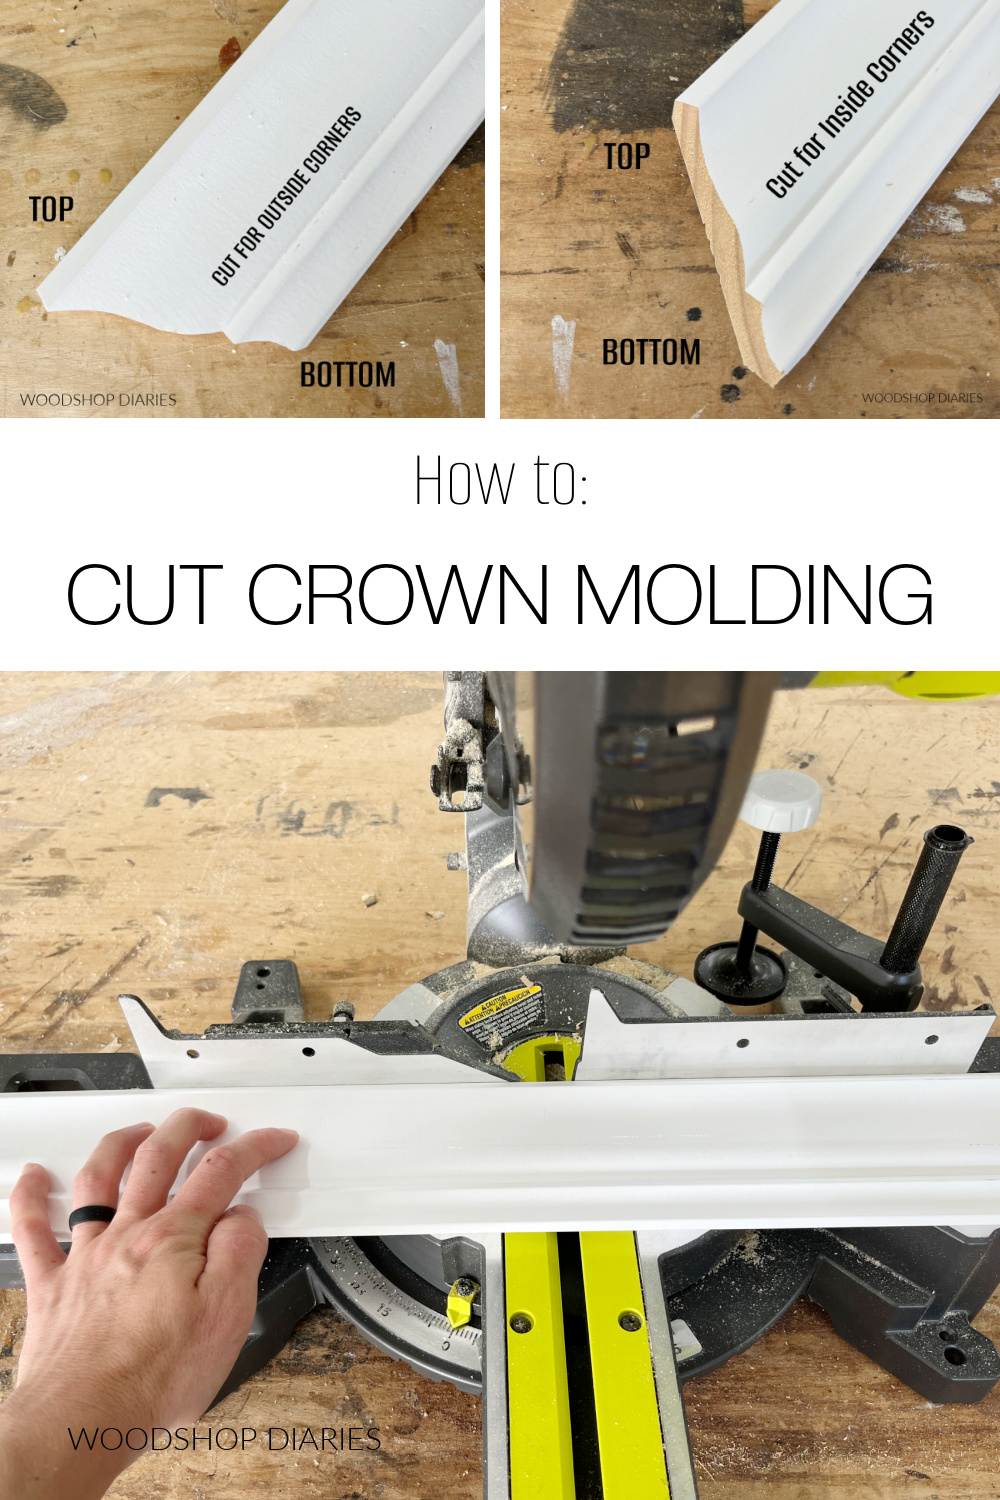 Pinterest collage image showing crown molding flat in miter saw at bottom and close up cuts for inside vs outside corners at top with text "how to cut crown molding"